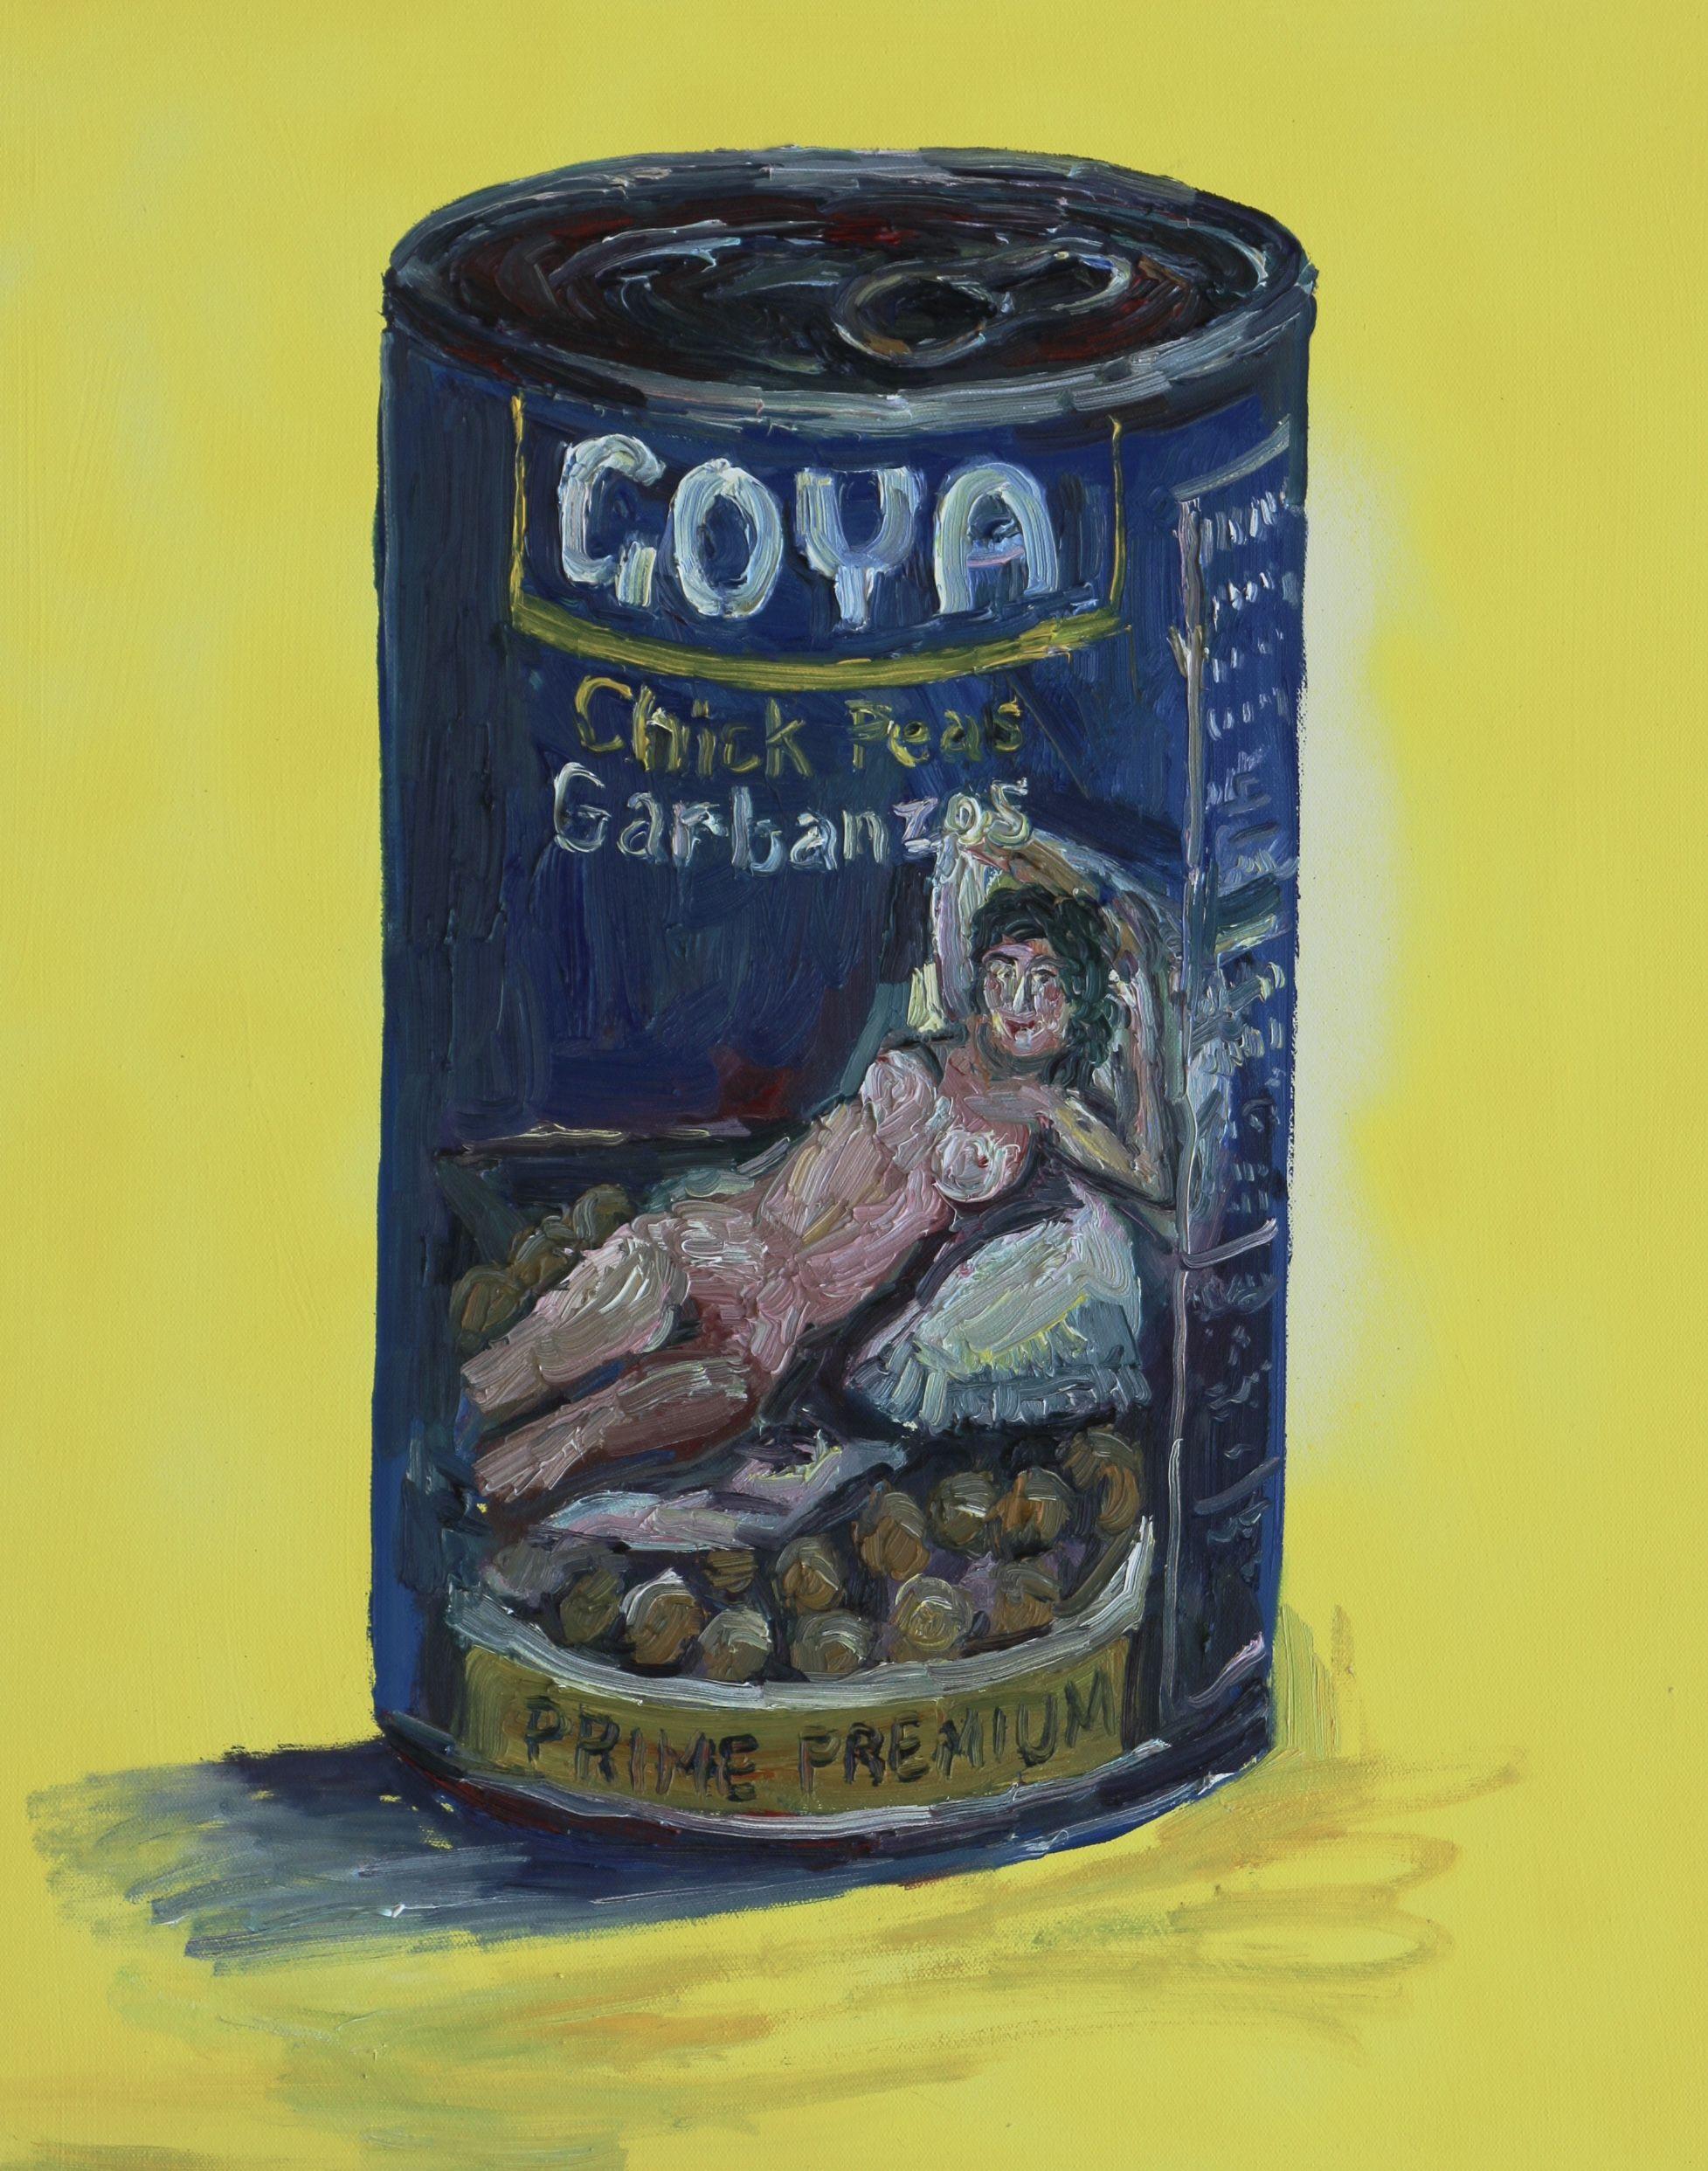 Goya's Nude Maja on a can of beans, Painting, Oil on Canvas